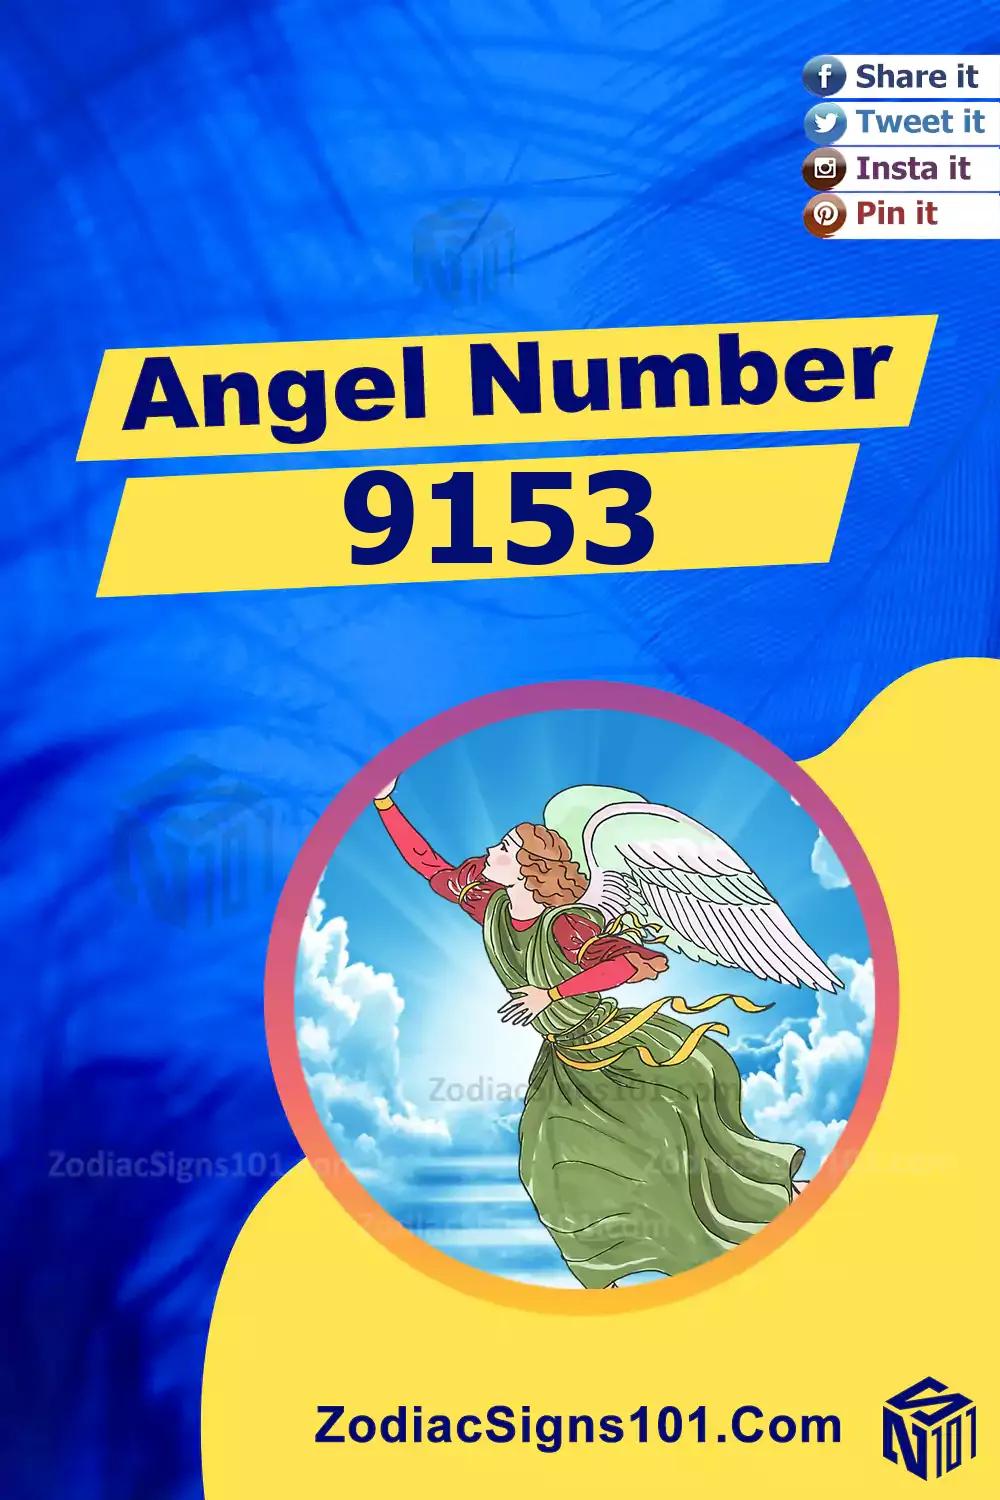 9153 Angel Number Meaning